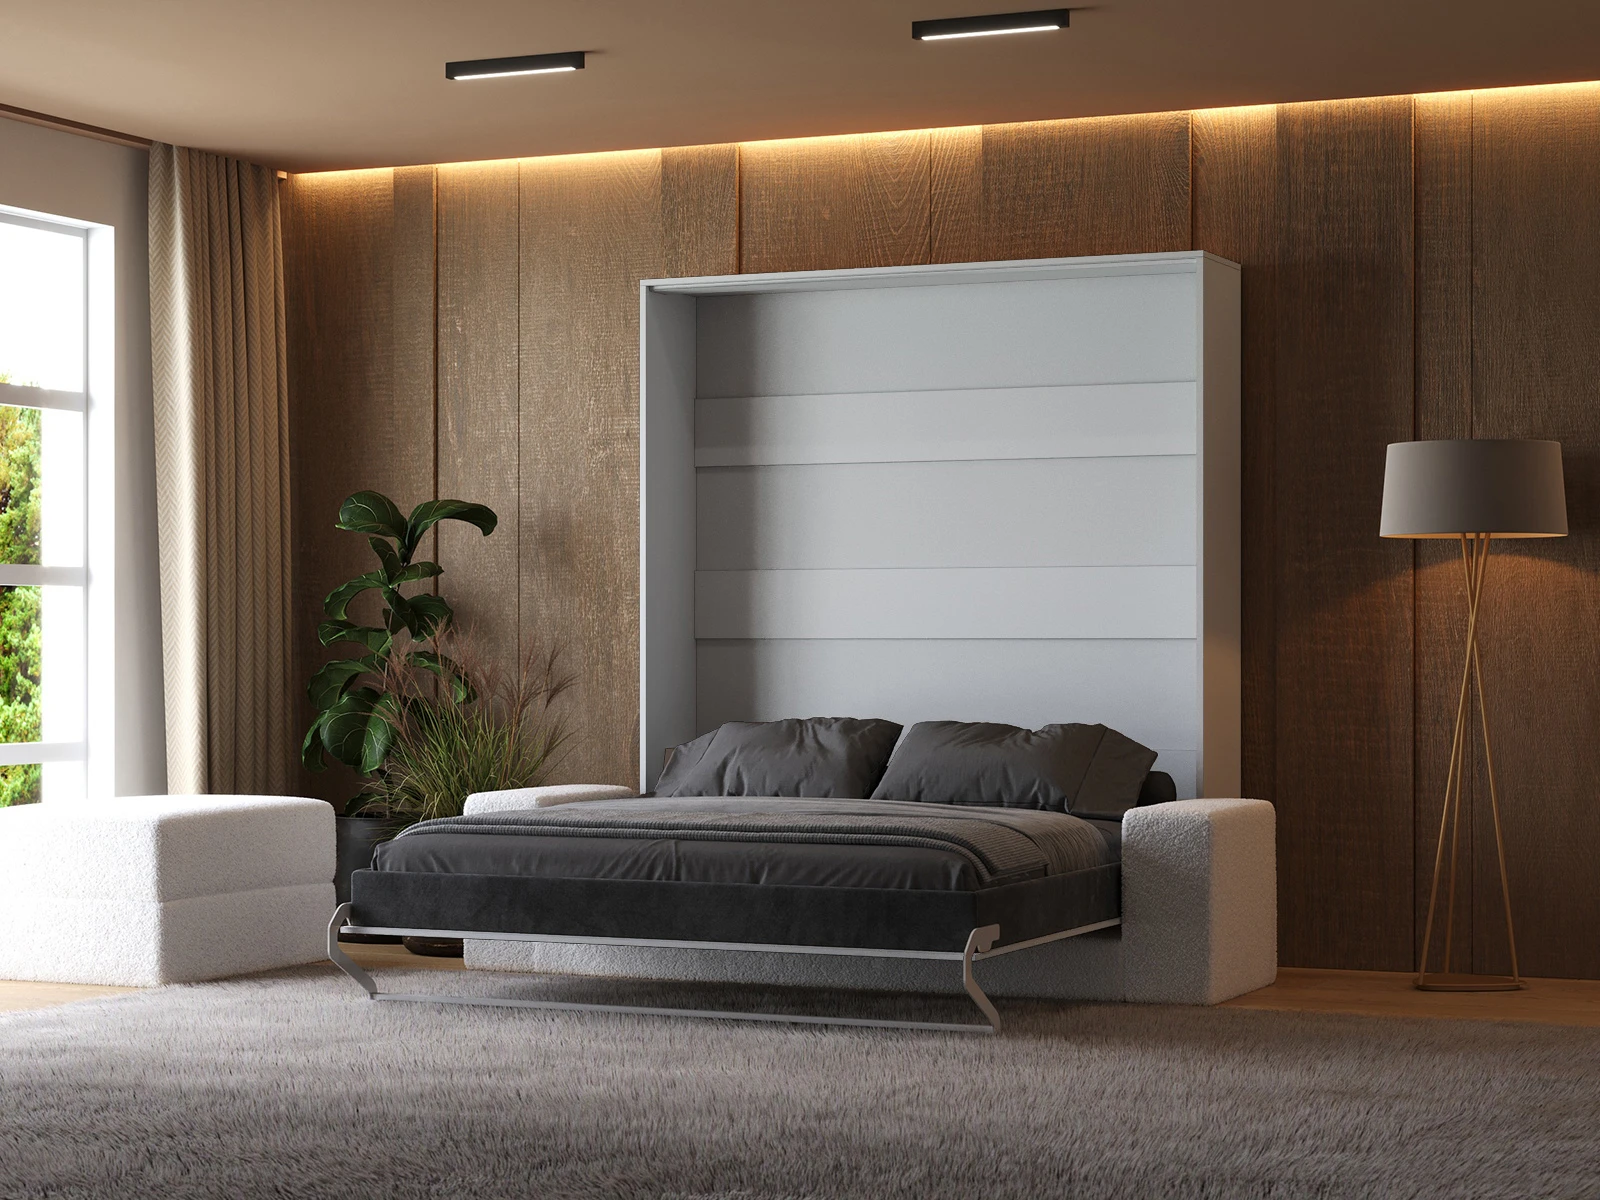 2 Murphy Bed (M1) 180x200 Vertical White / White Gloss with Sofa White